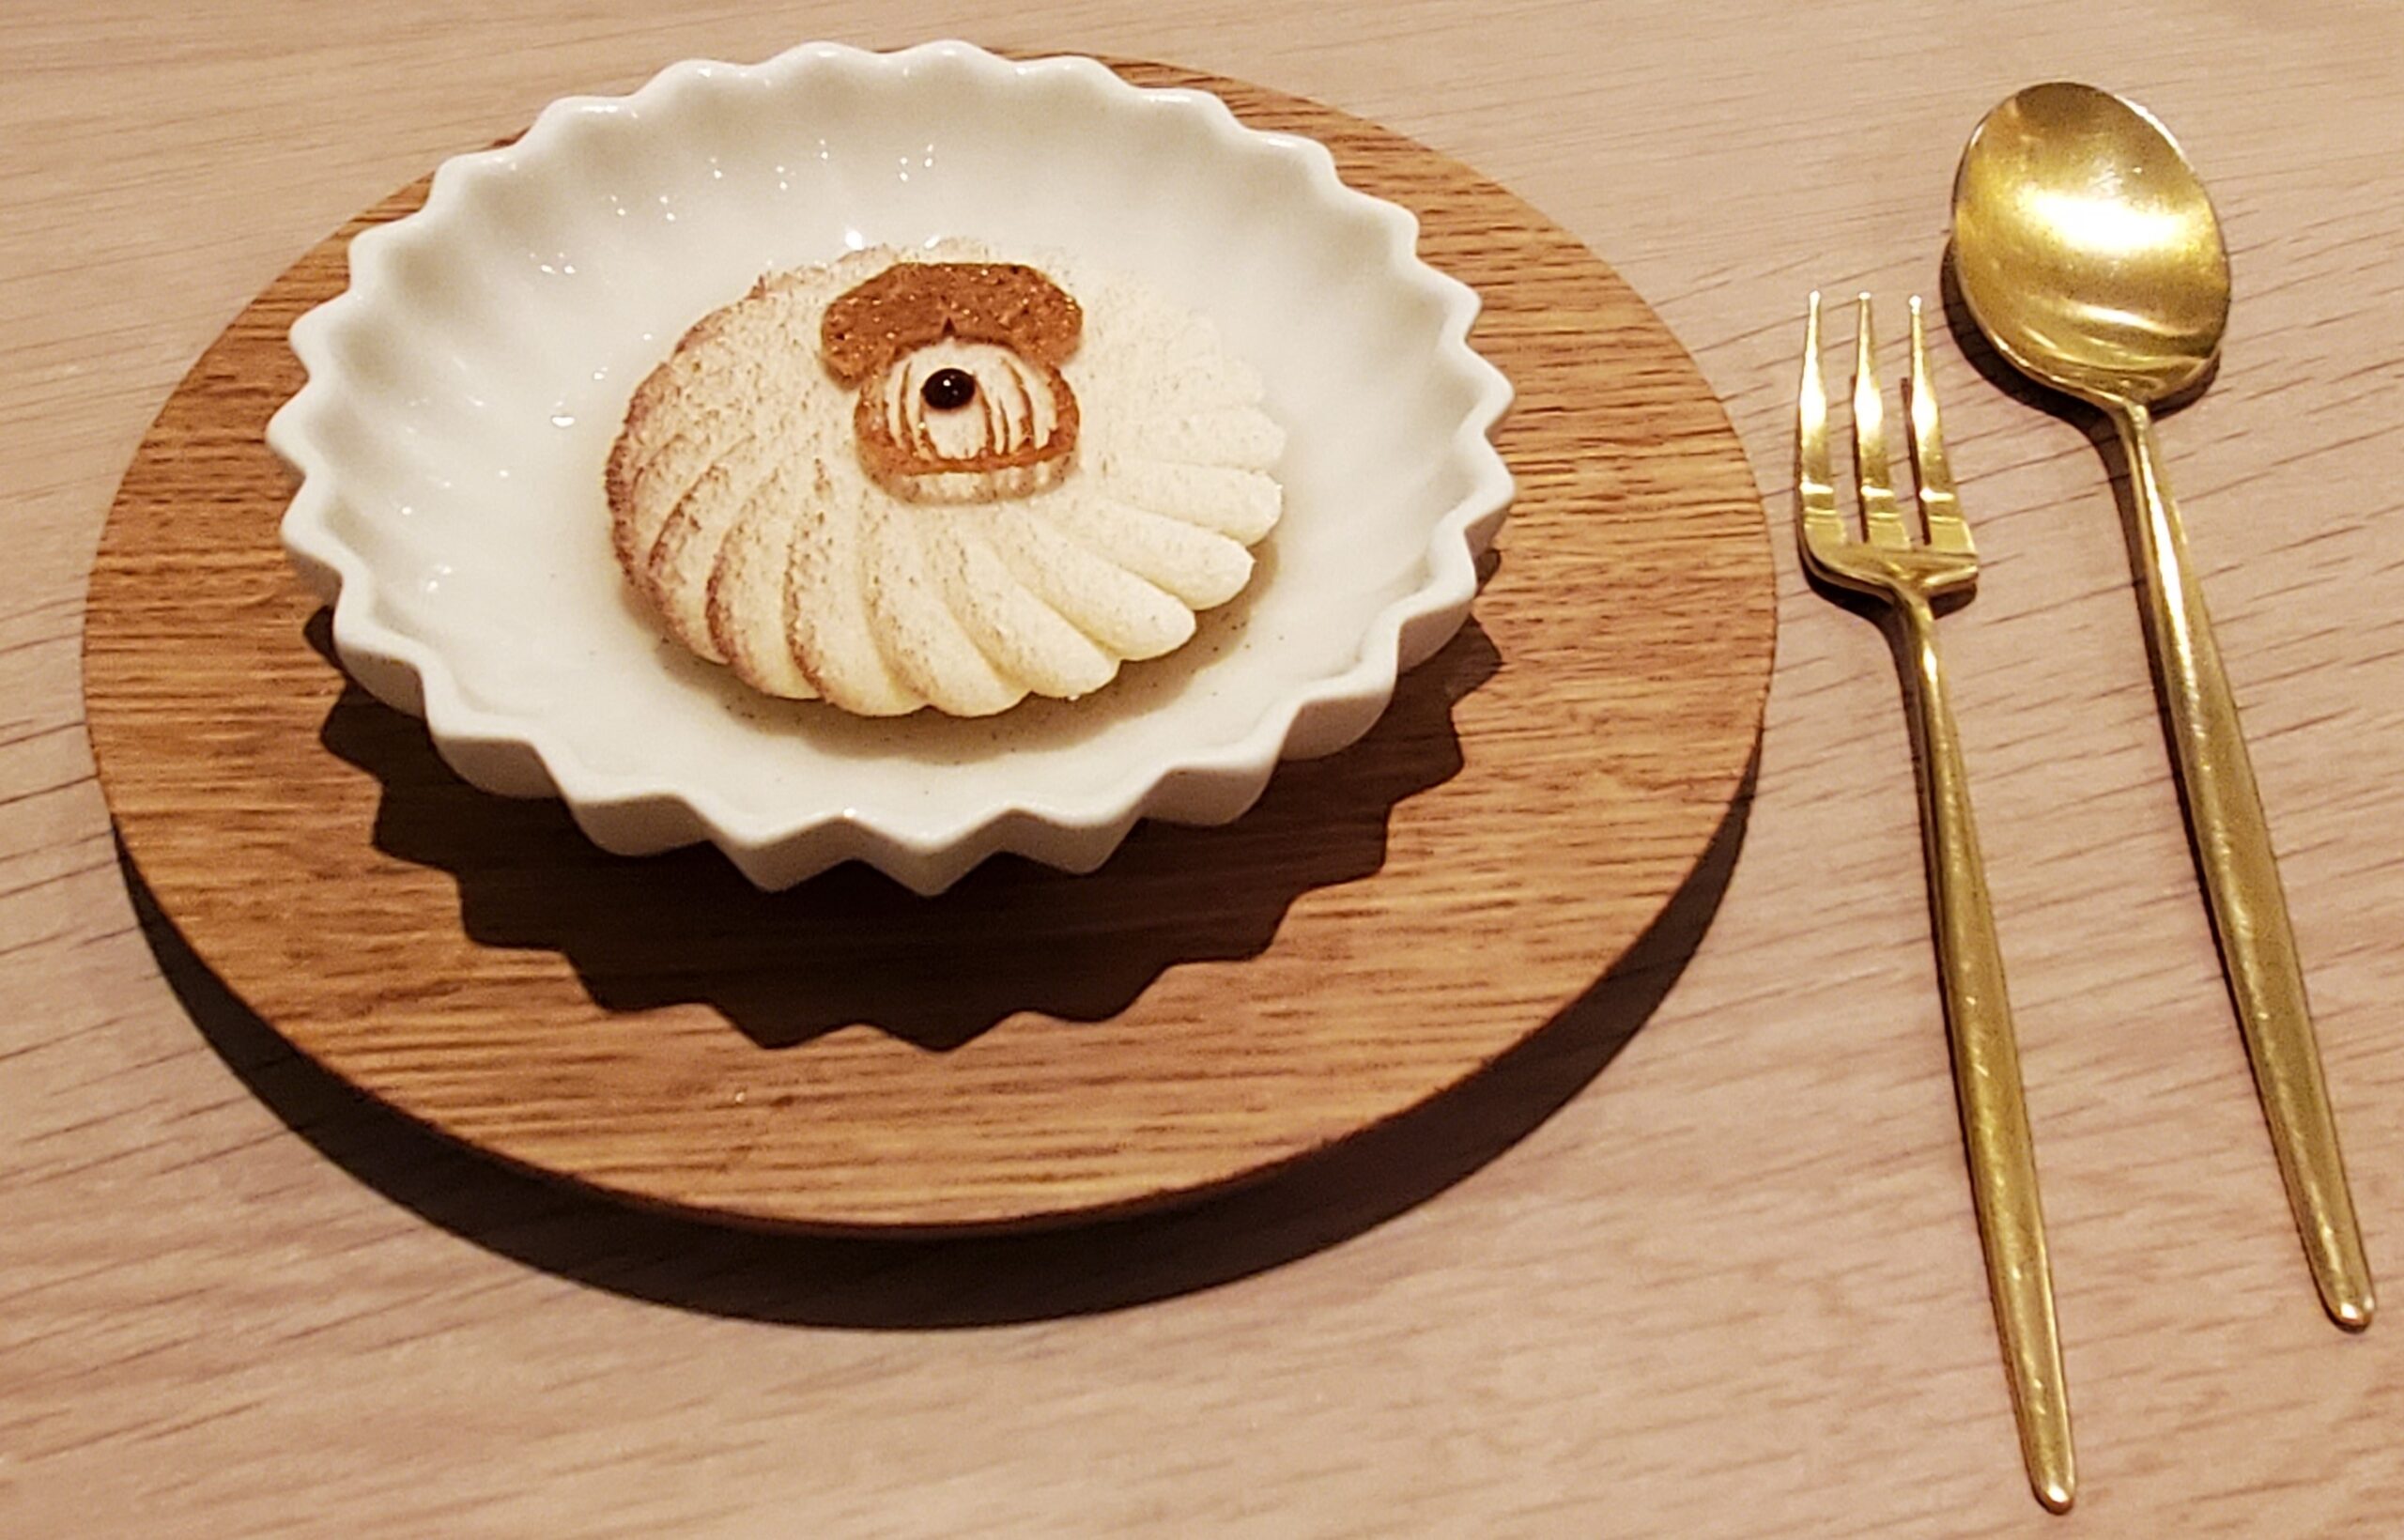 a plate with a cookie on it and a fork on a wood surface